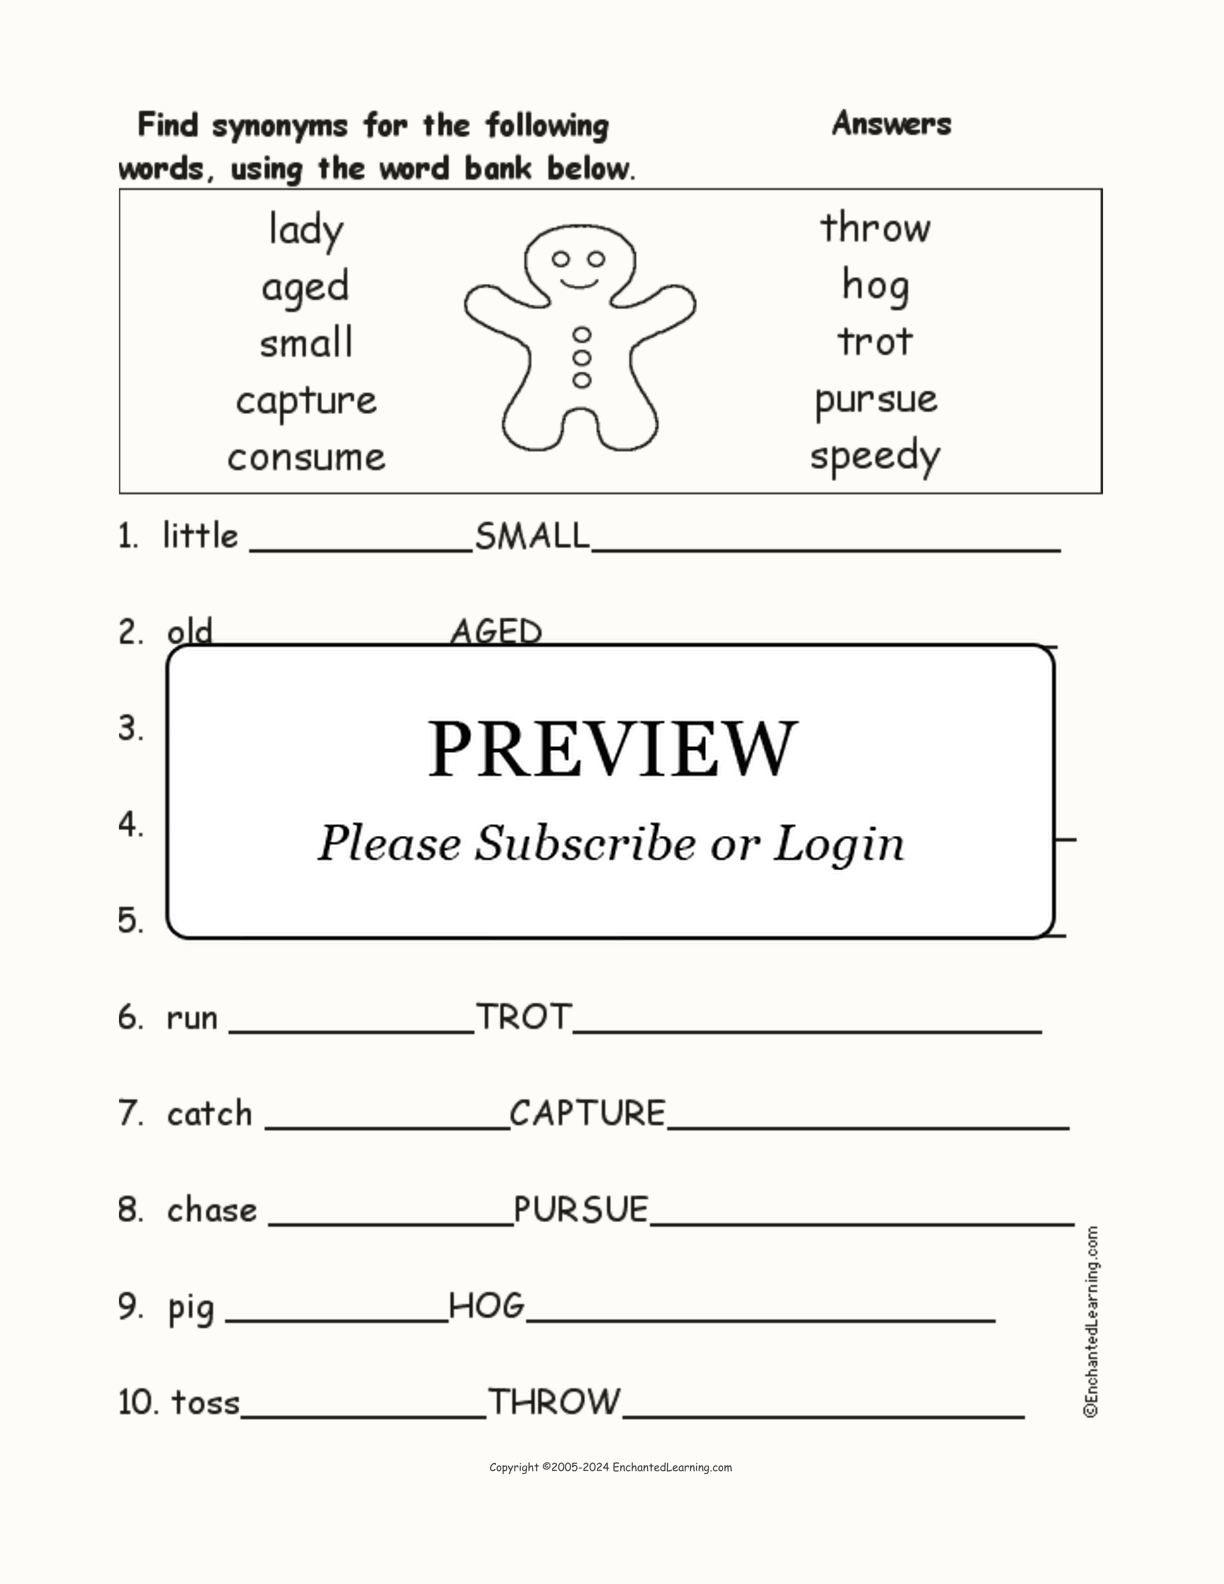 'The Gingerbread Man' Synonyms interactive worksheet page 2